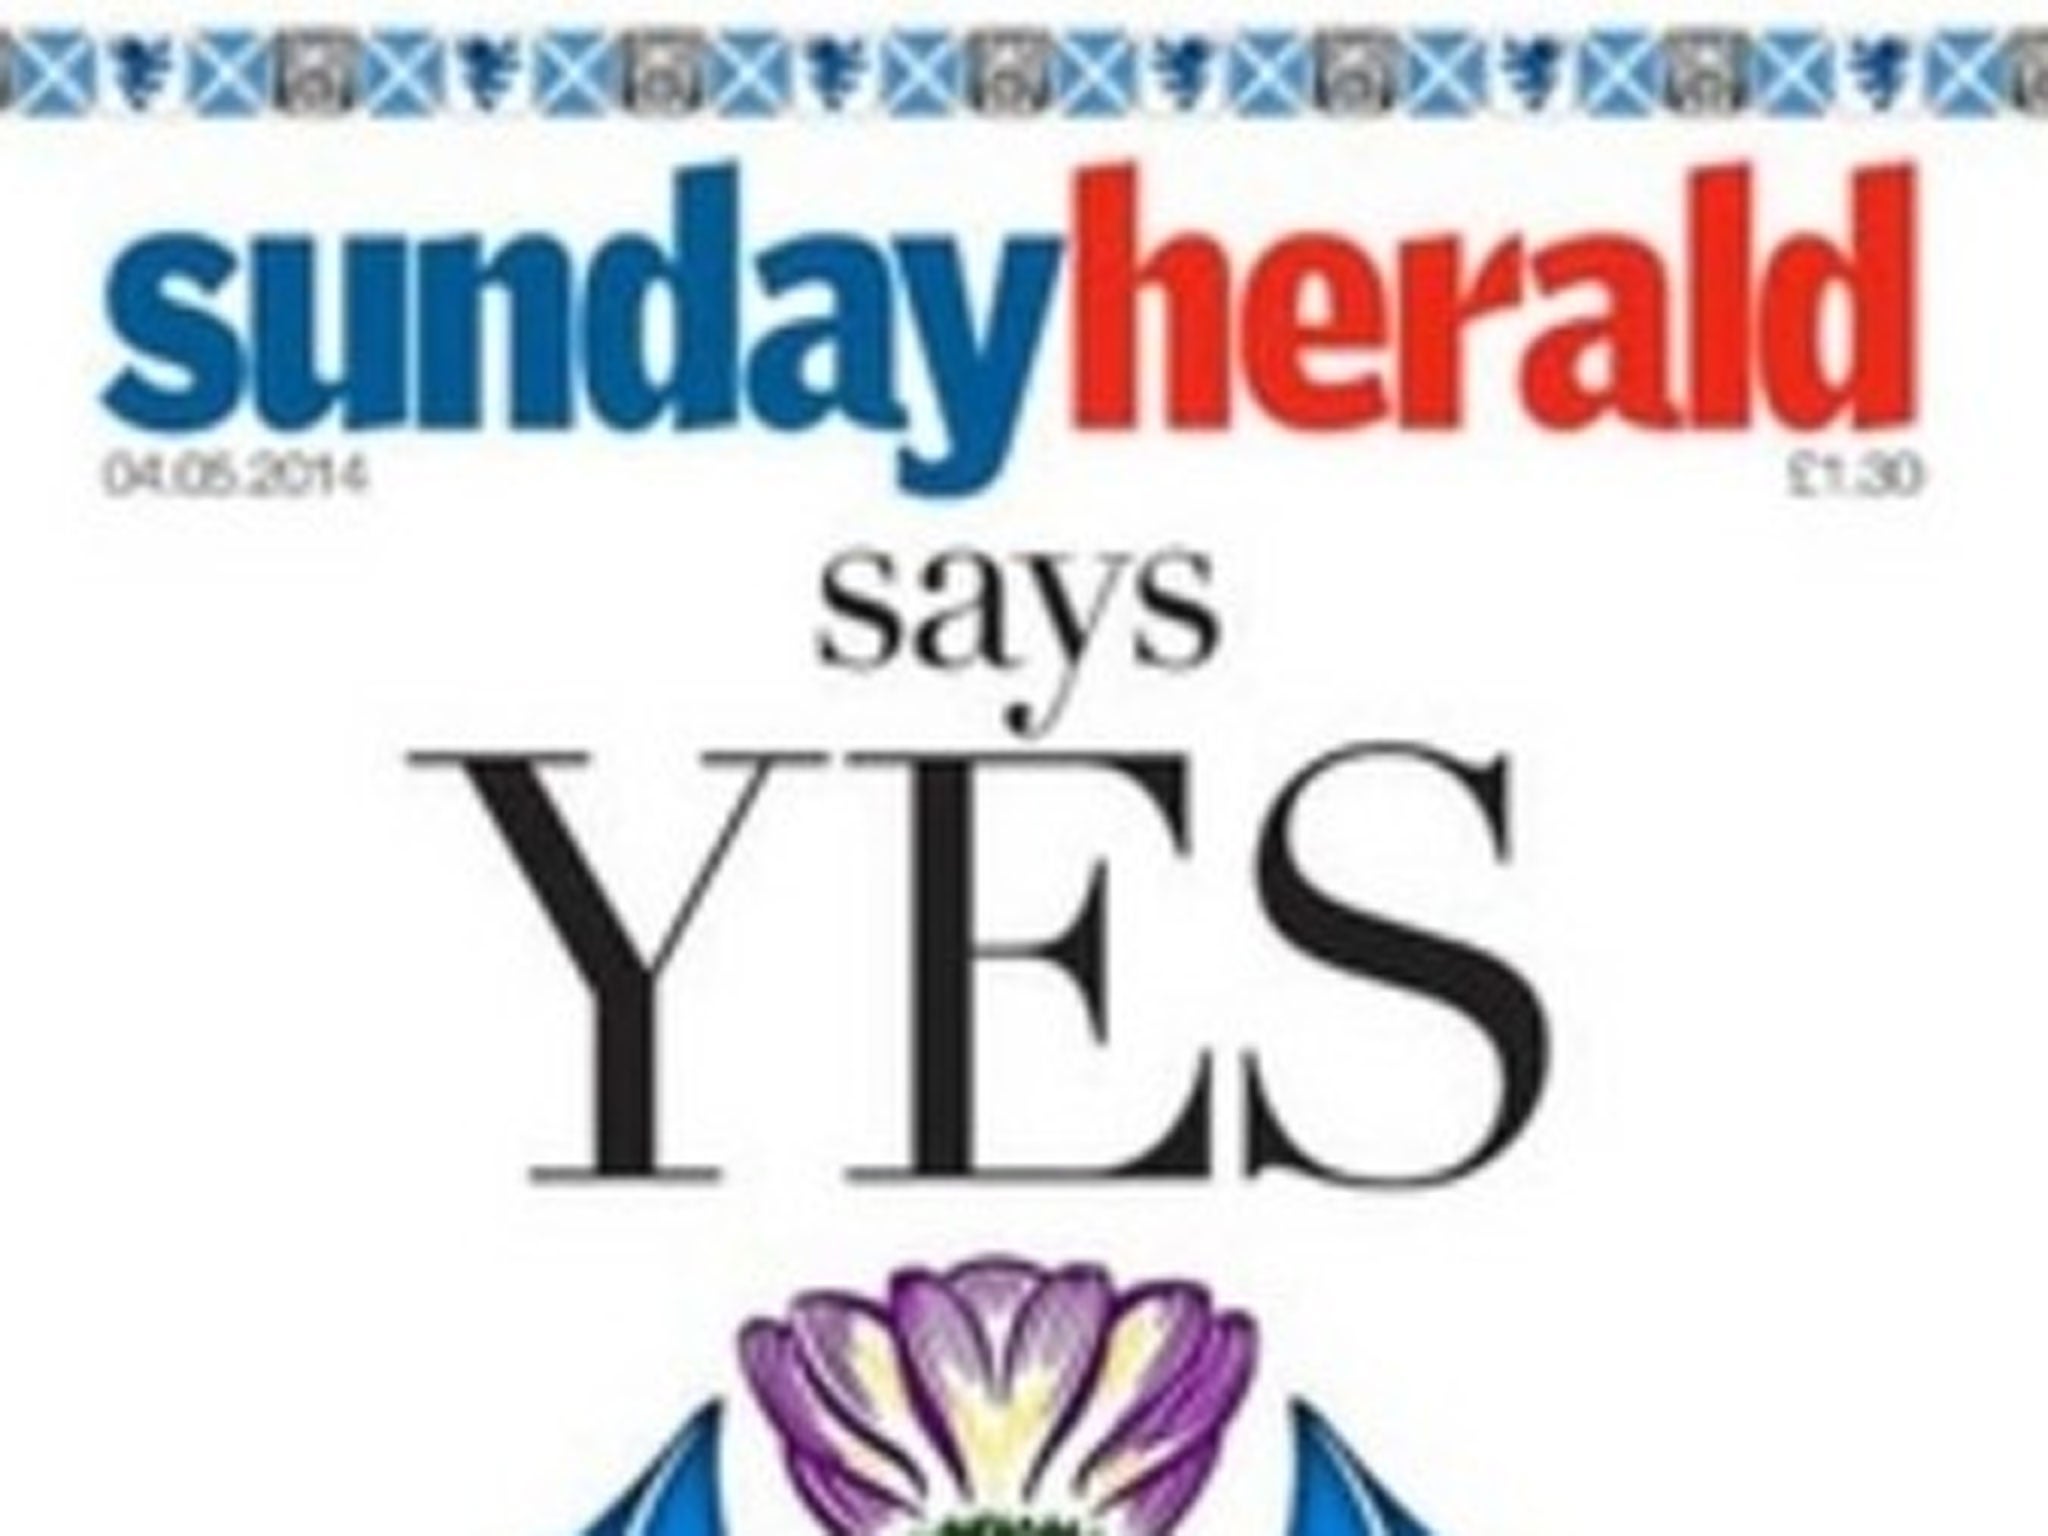 The Sunday Herald's front page